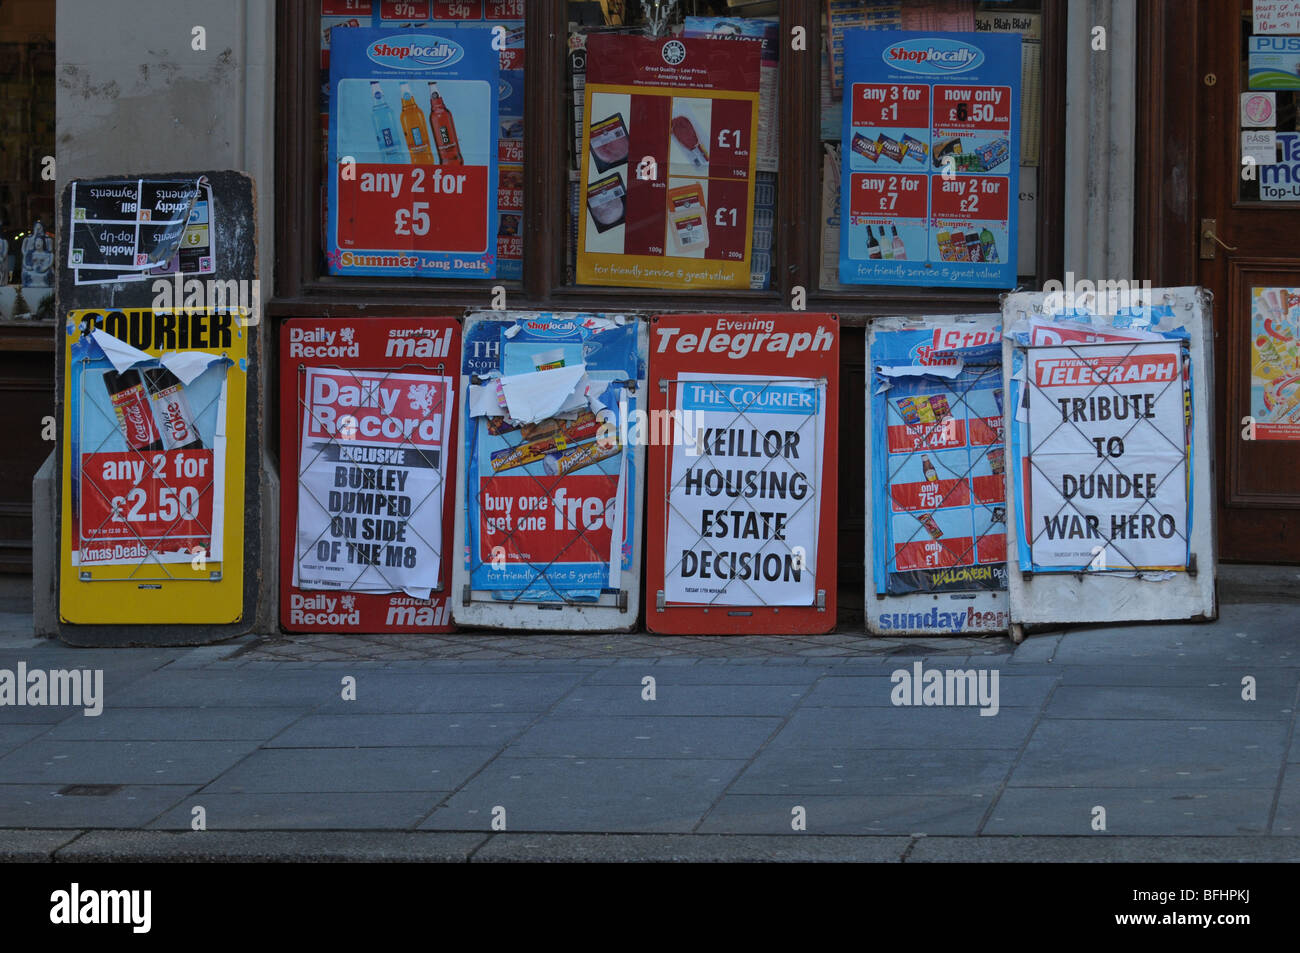 Newspaper headlines on advertising boards outside a newsagent. Stock Photo